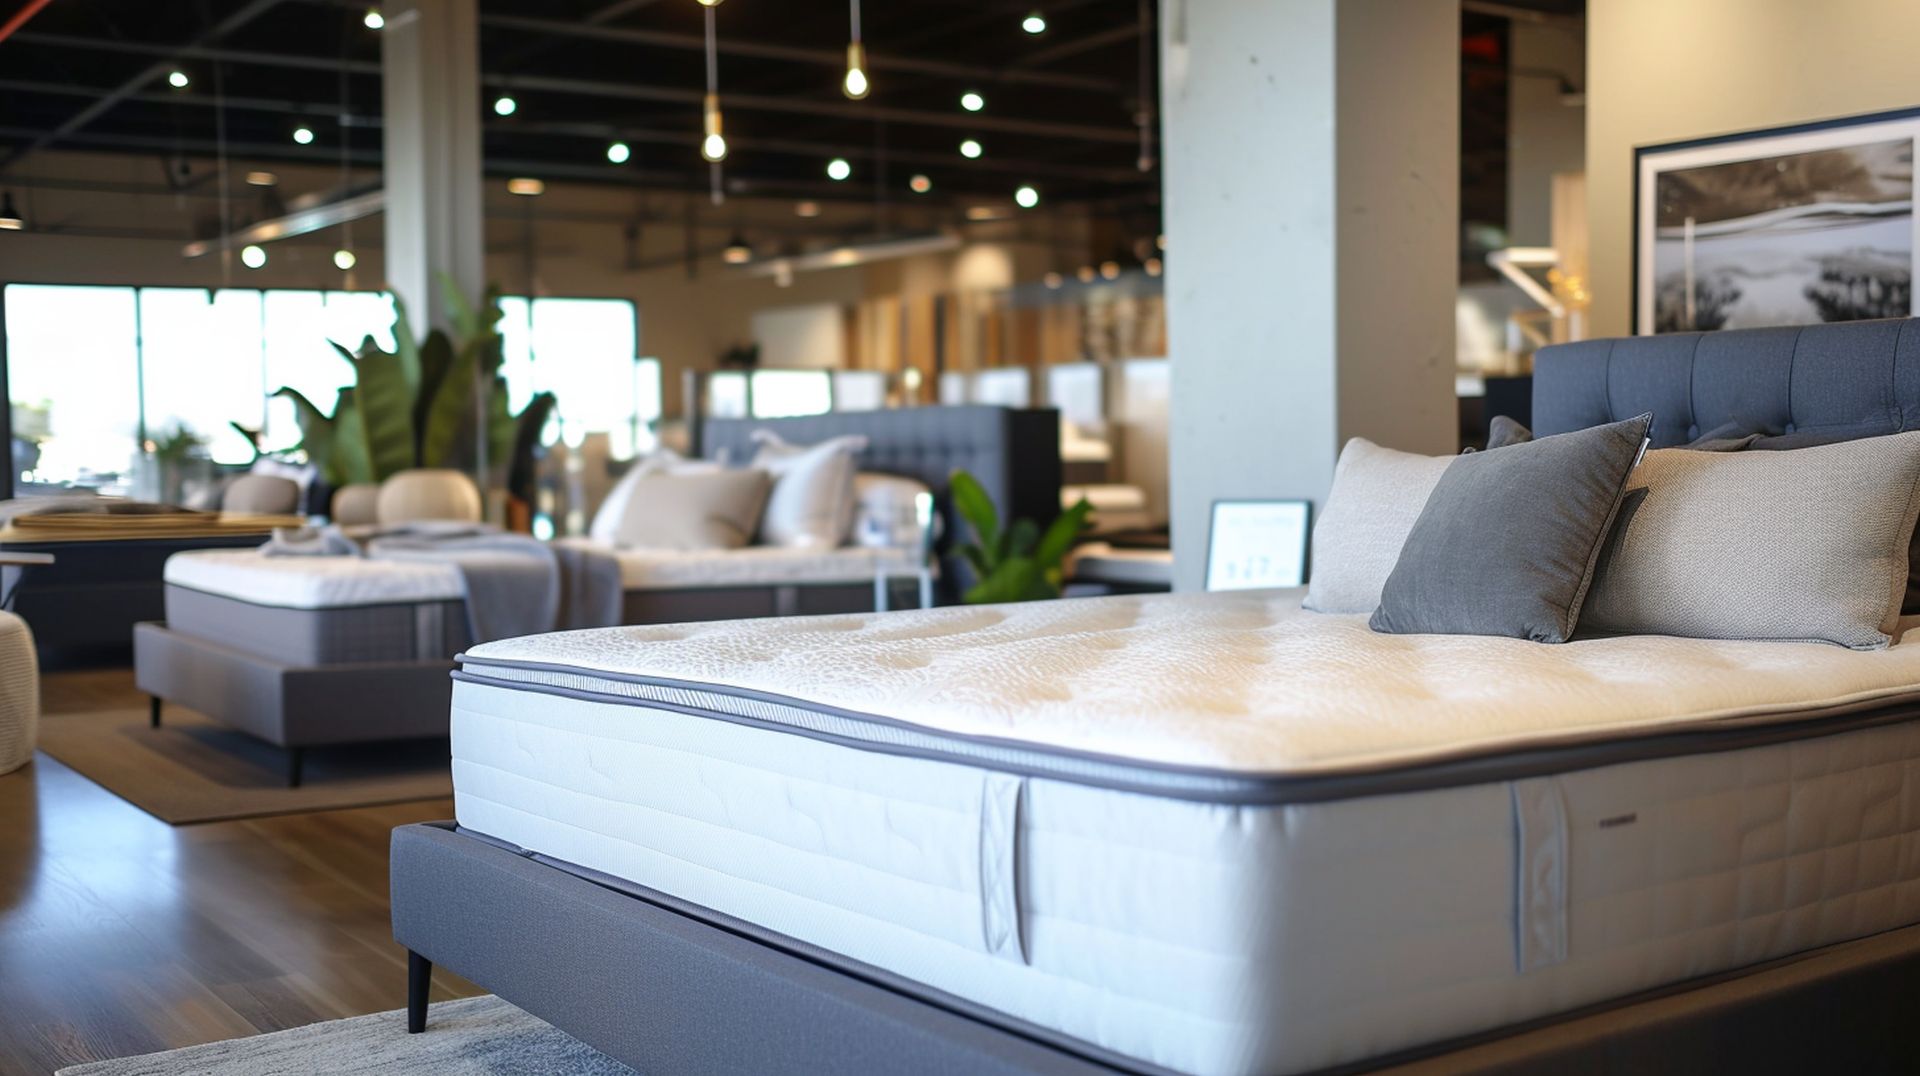 Local Avondale mattress stores have the best prices, sales, and deals if you're looking for a new mattress in Avondale